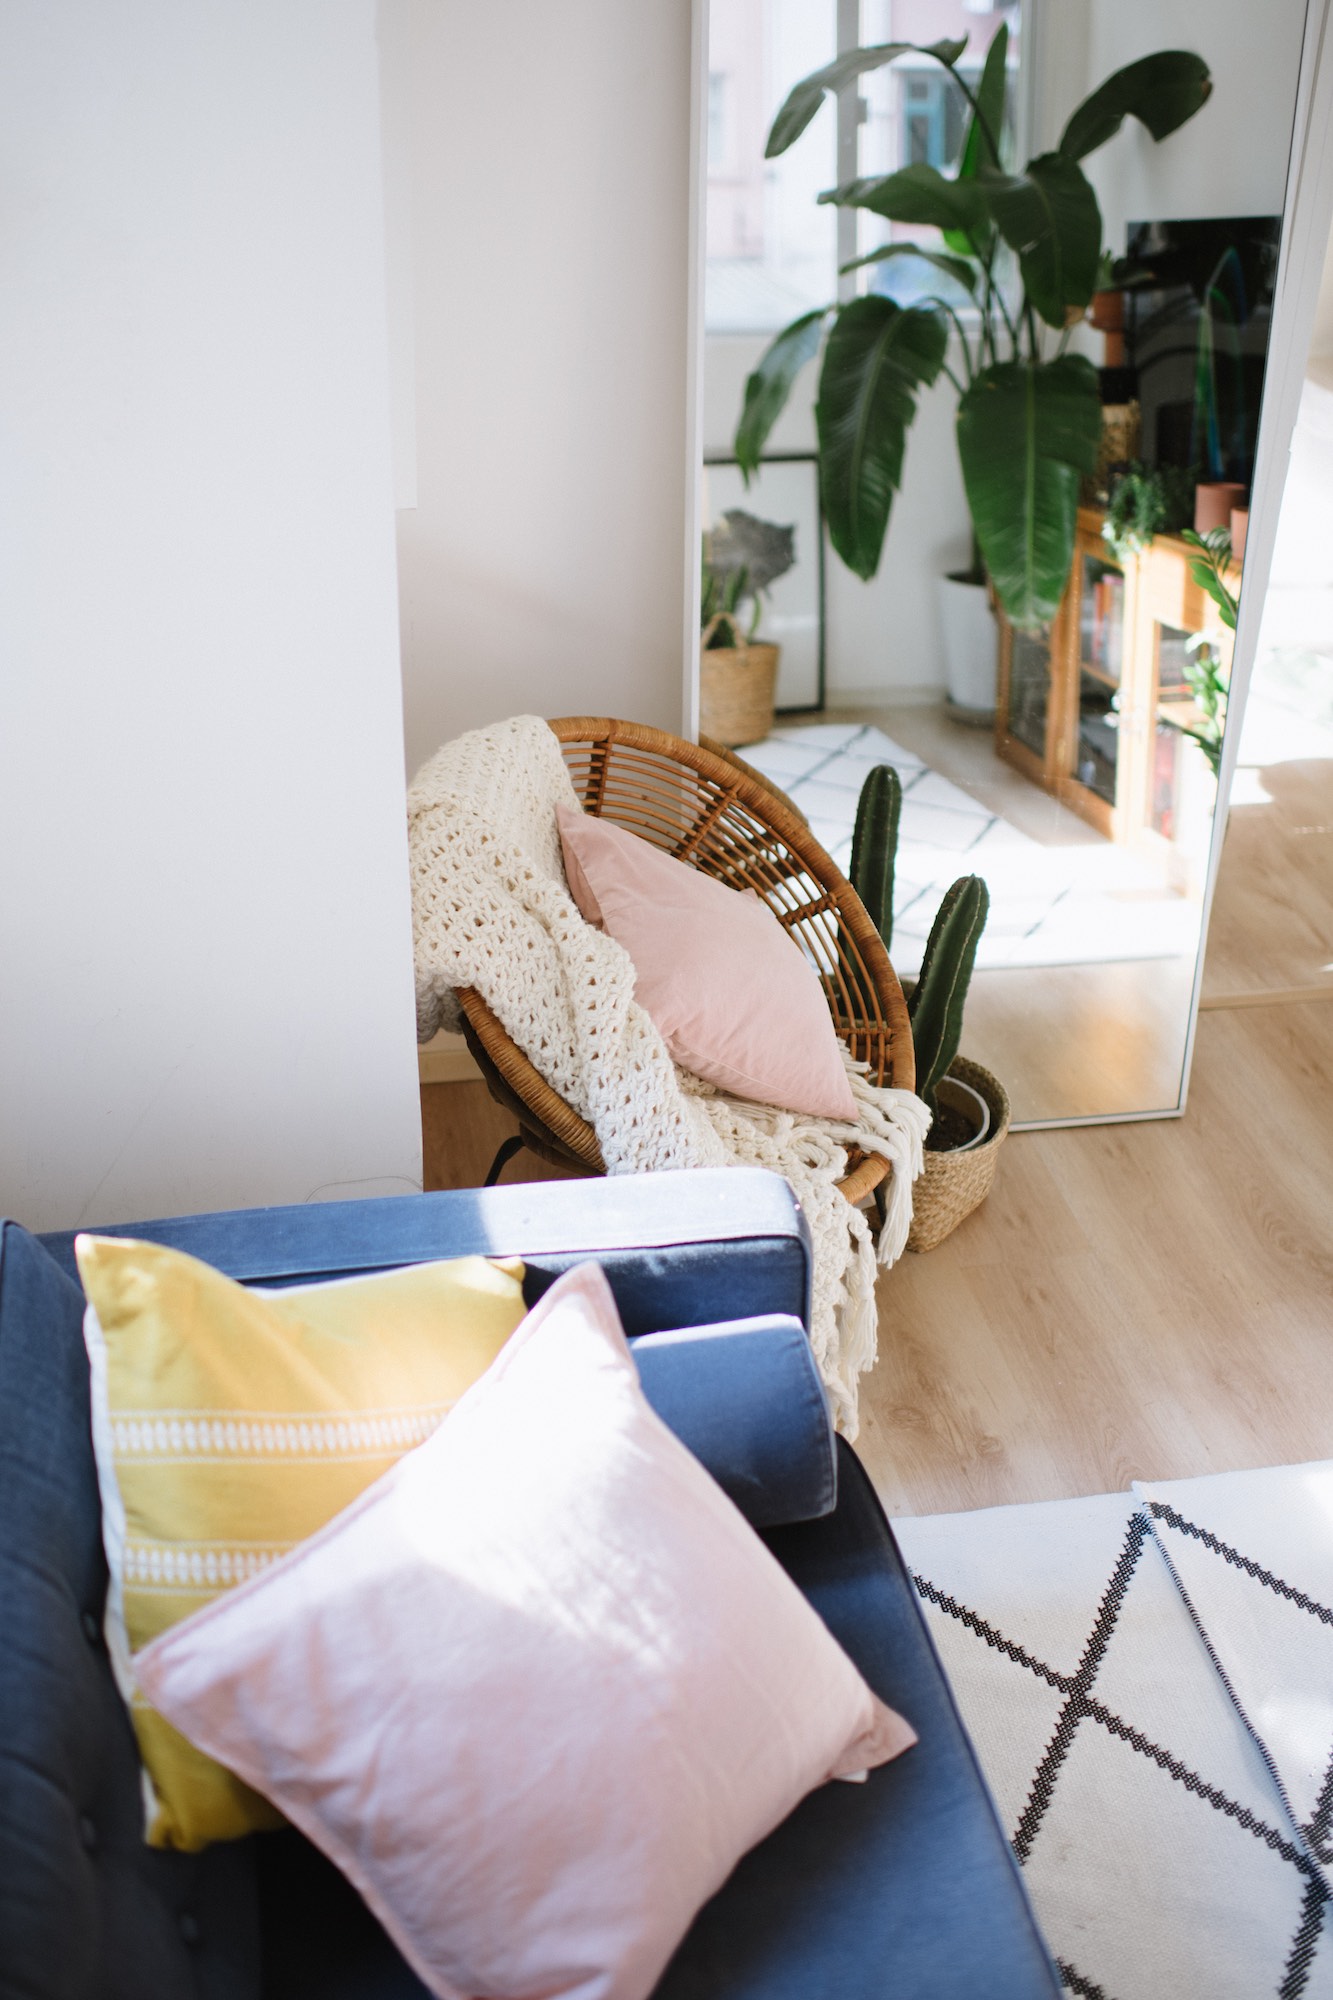 How To Make Your Tiny Living Space Look Huge